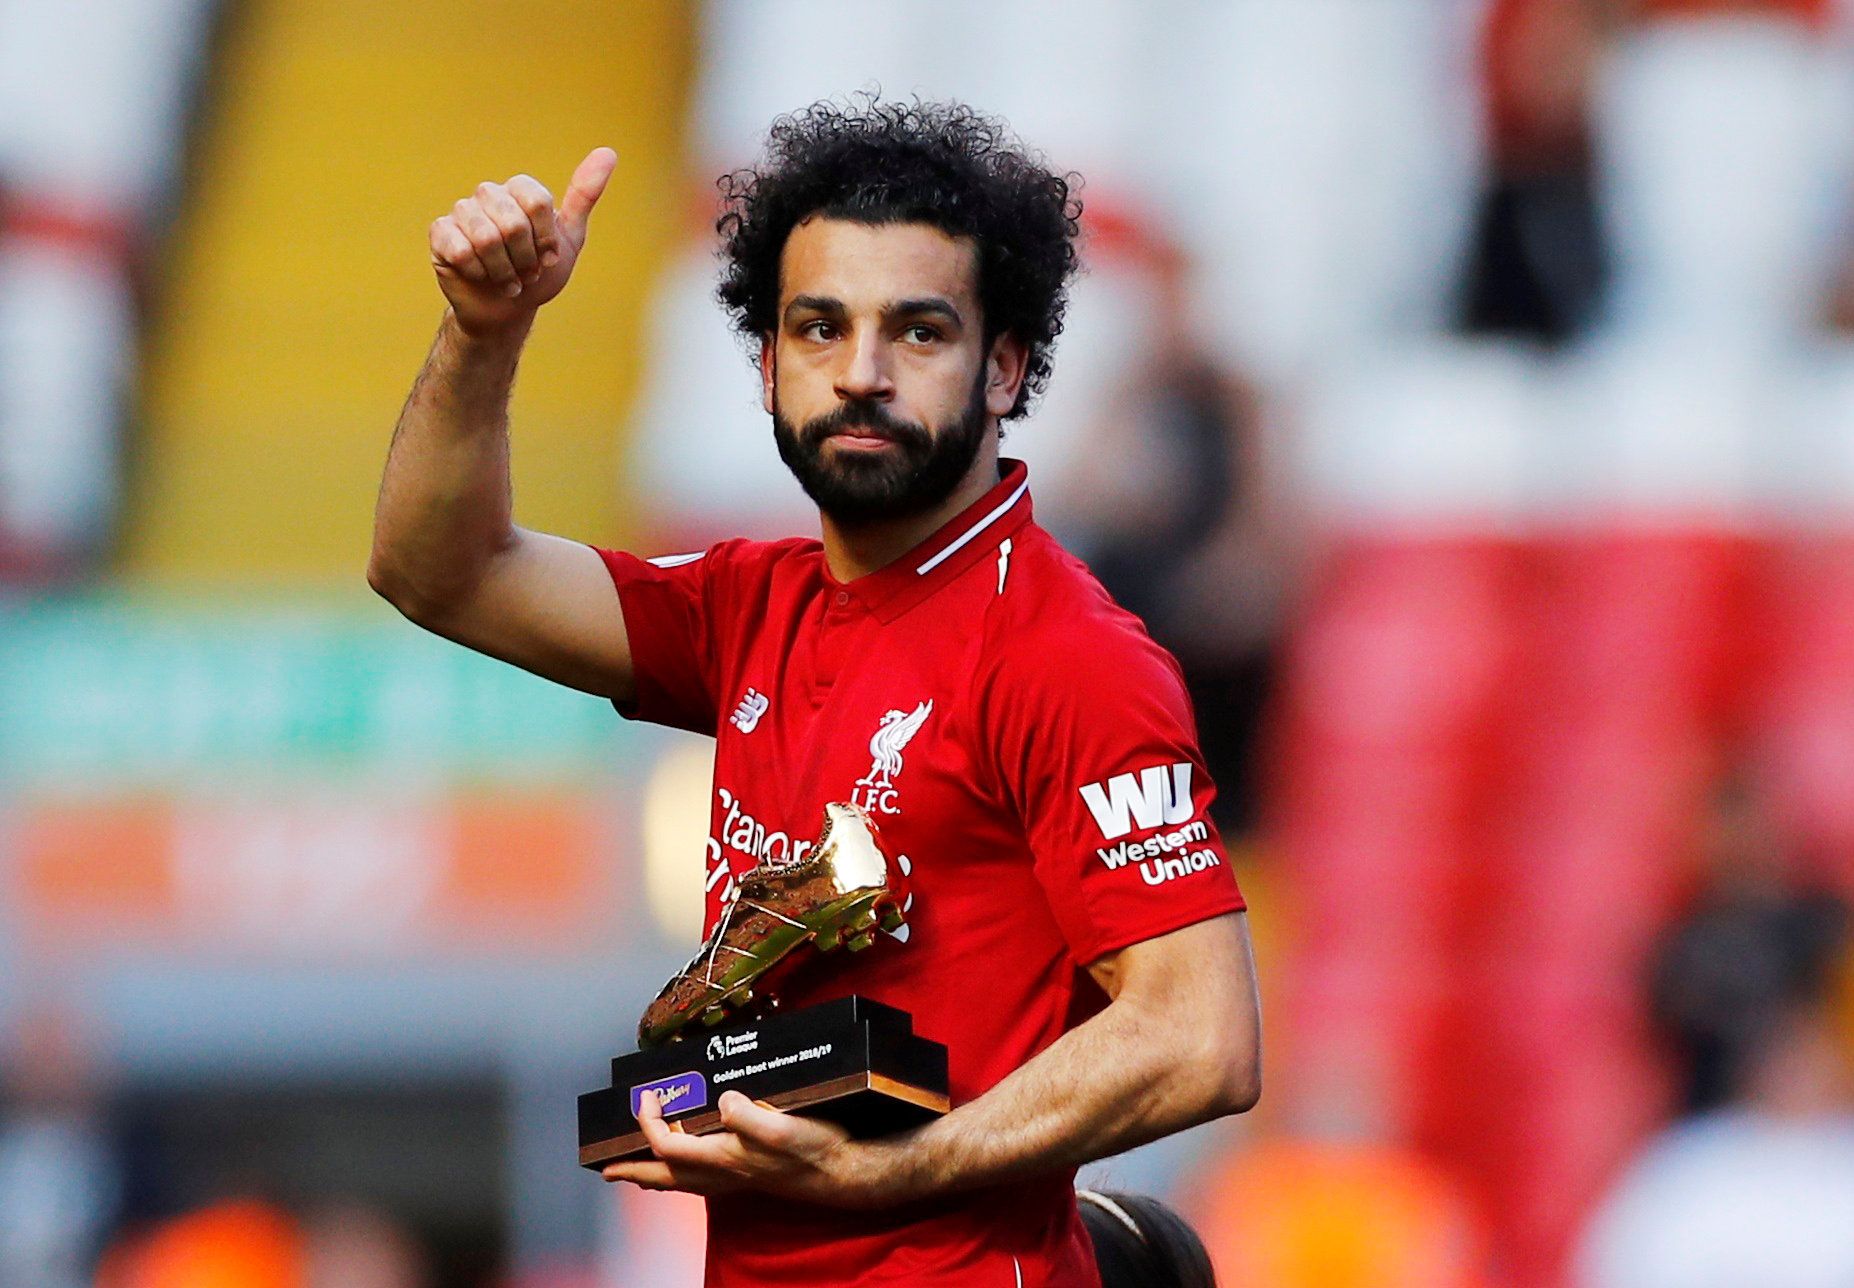 Soccer Football - Premier League - Liverpool v Wolverhampton Wanderers - Anfield, Liverpool, Britain - May 12, 2019  Liverpool's Mohamed Salah gestures to the fans as he holds a trophy for winning the Premier League Golden Boot award after the match  REUTERS/Phil Noble  EDITORIAL USE ONLY. No use with unauthorized audio, video, data, fixture lists, club/league logos or 